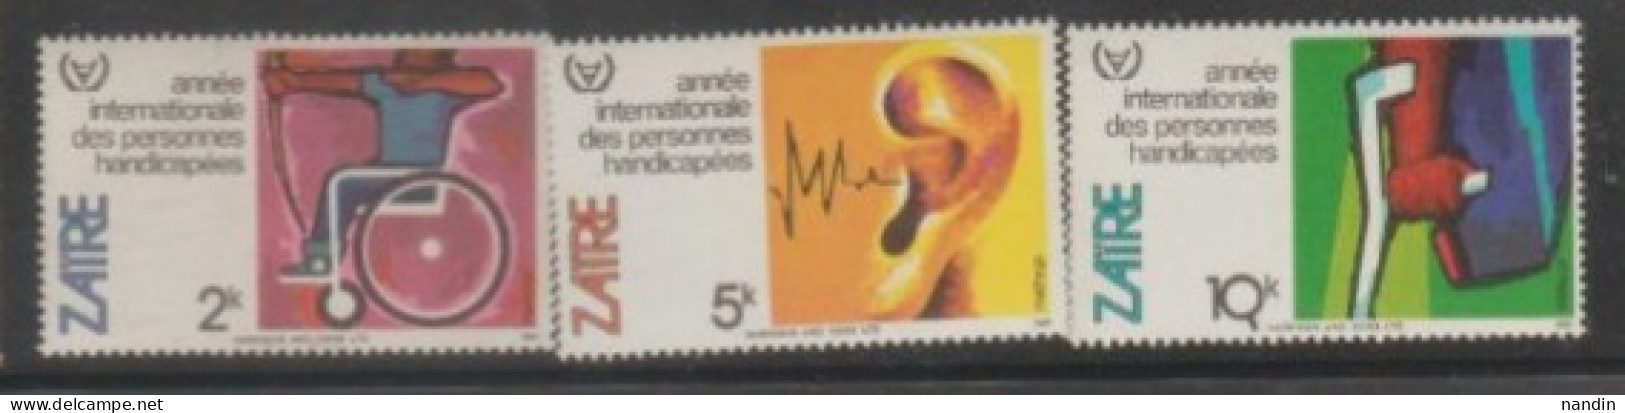 1981 ZAIRE STAMPS On  International Year Of Disabled People/Health - Usati